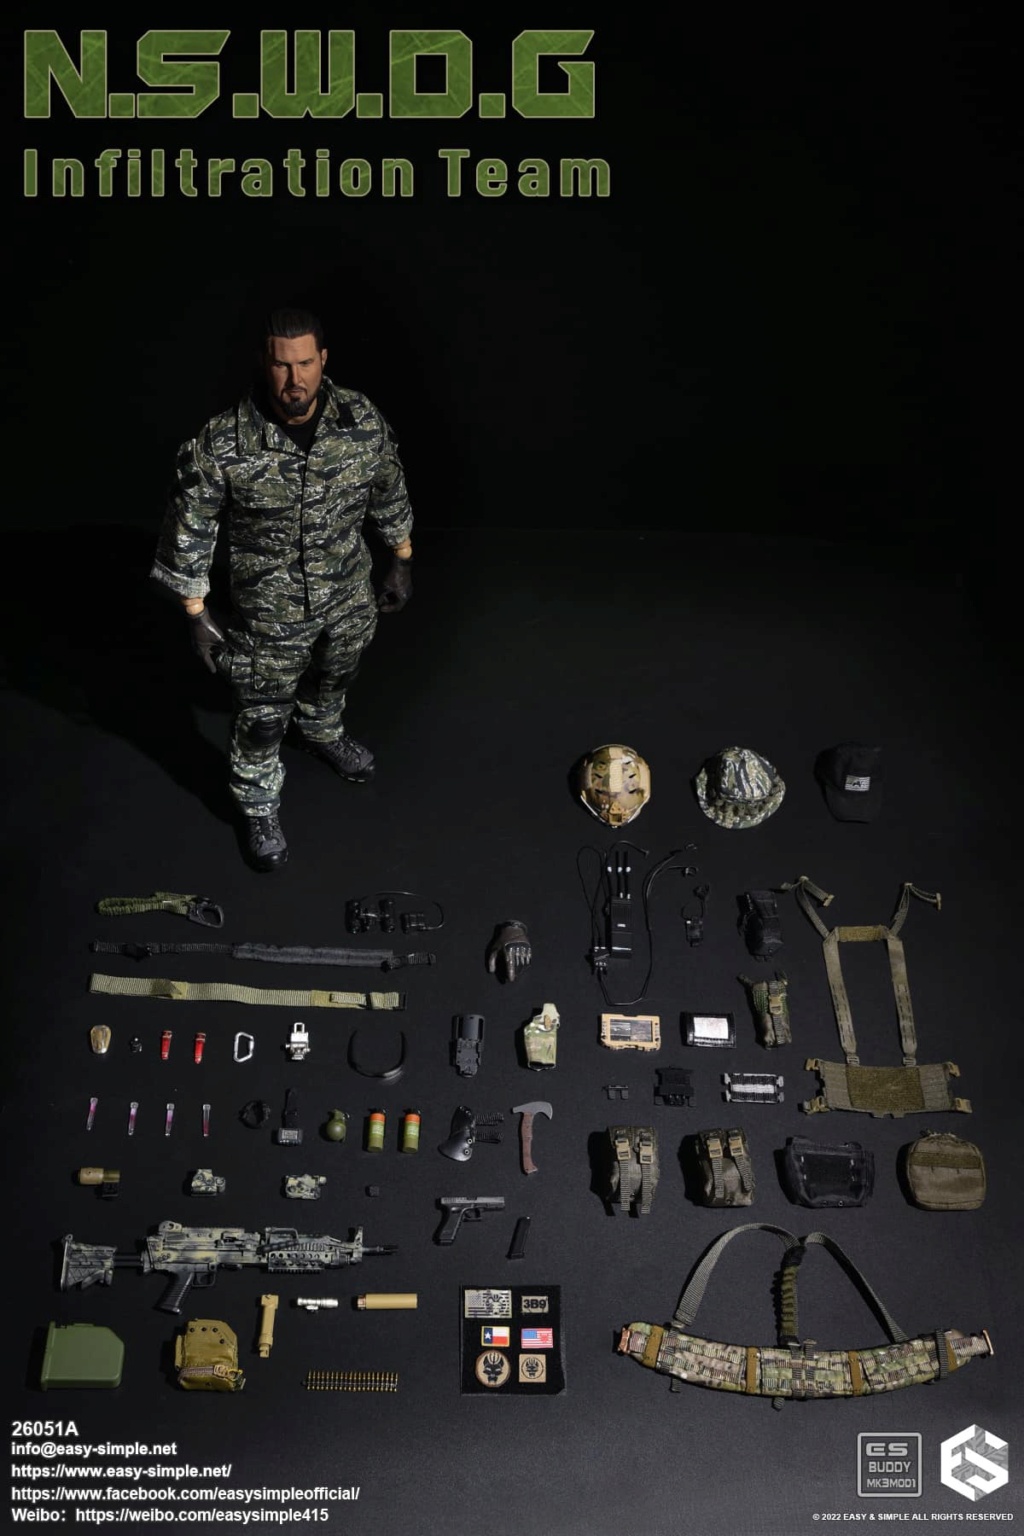 InfilitrationTeam - NEW PRODUCT: EASY AND SIMPLE 1/6 SCALE FIGURE: N.S.W.D.G INFILTRATION TEAM - (2 Versions) 44115